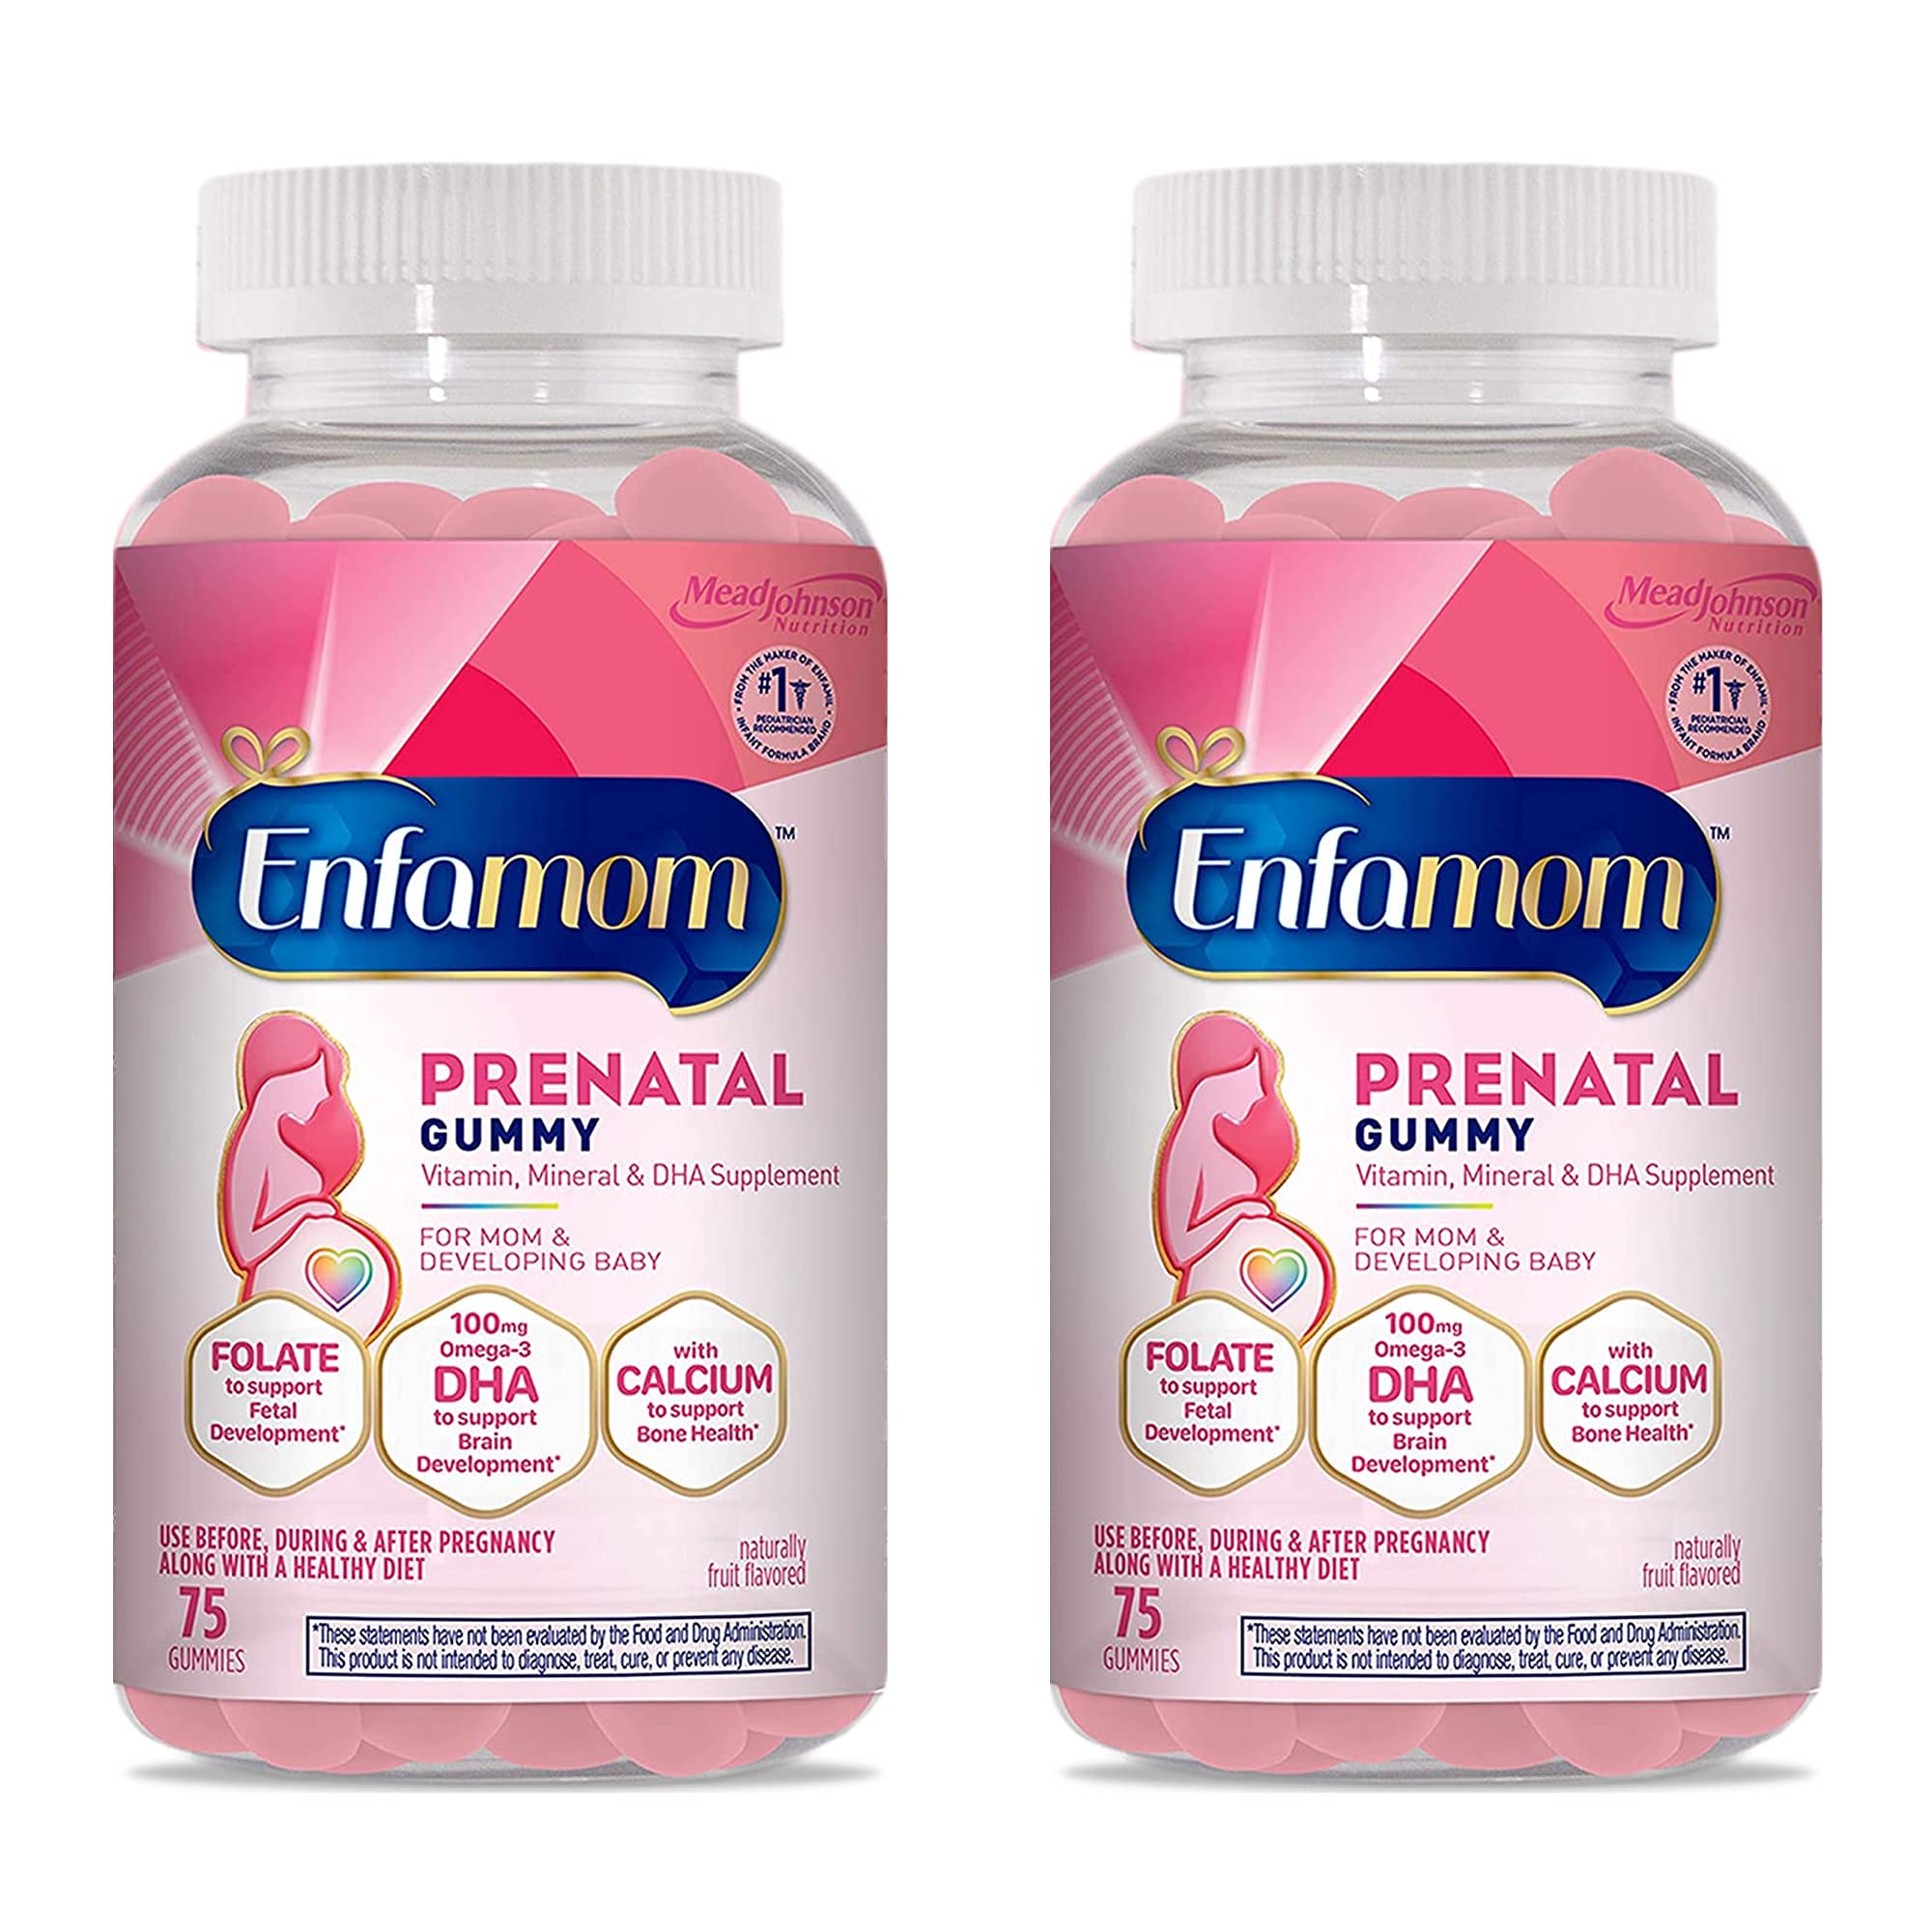 Enfamom Prenatal Gummy Vitamins, Omega-3 DHA + Folate + Calcium Supplement for Pregnant and Lactating Women from Enfamil, 75 Gummies (Pack of 2)